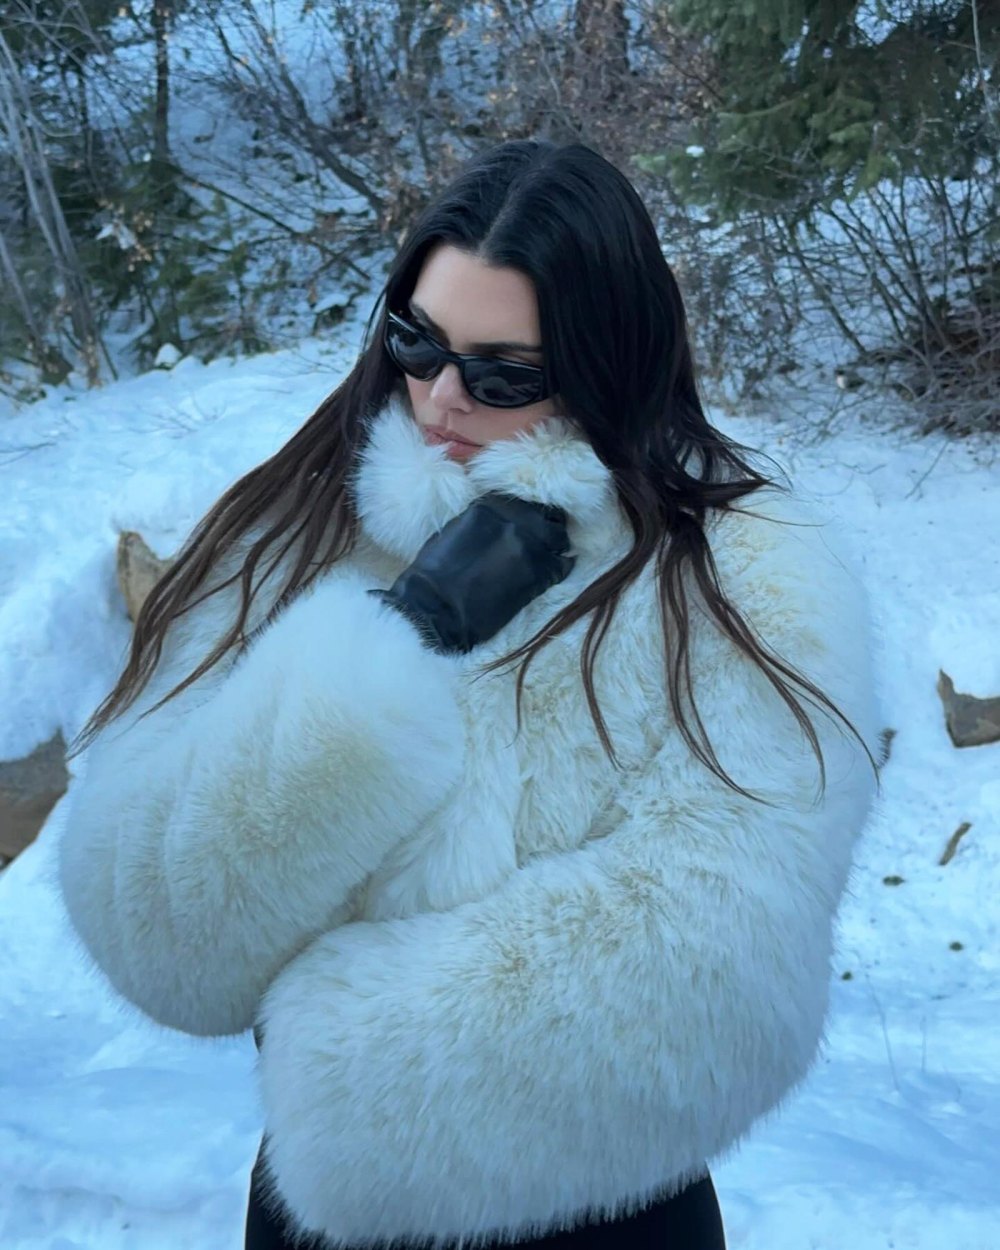 Kendall Jenner smiles softly while keeping warm in a white fur coat in Aspen